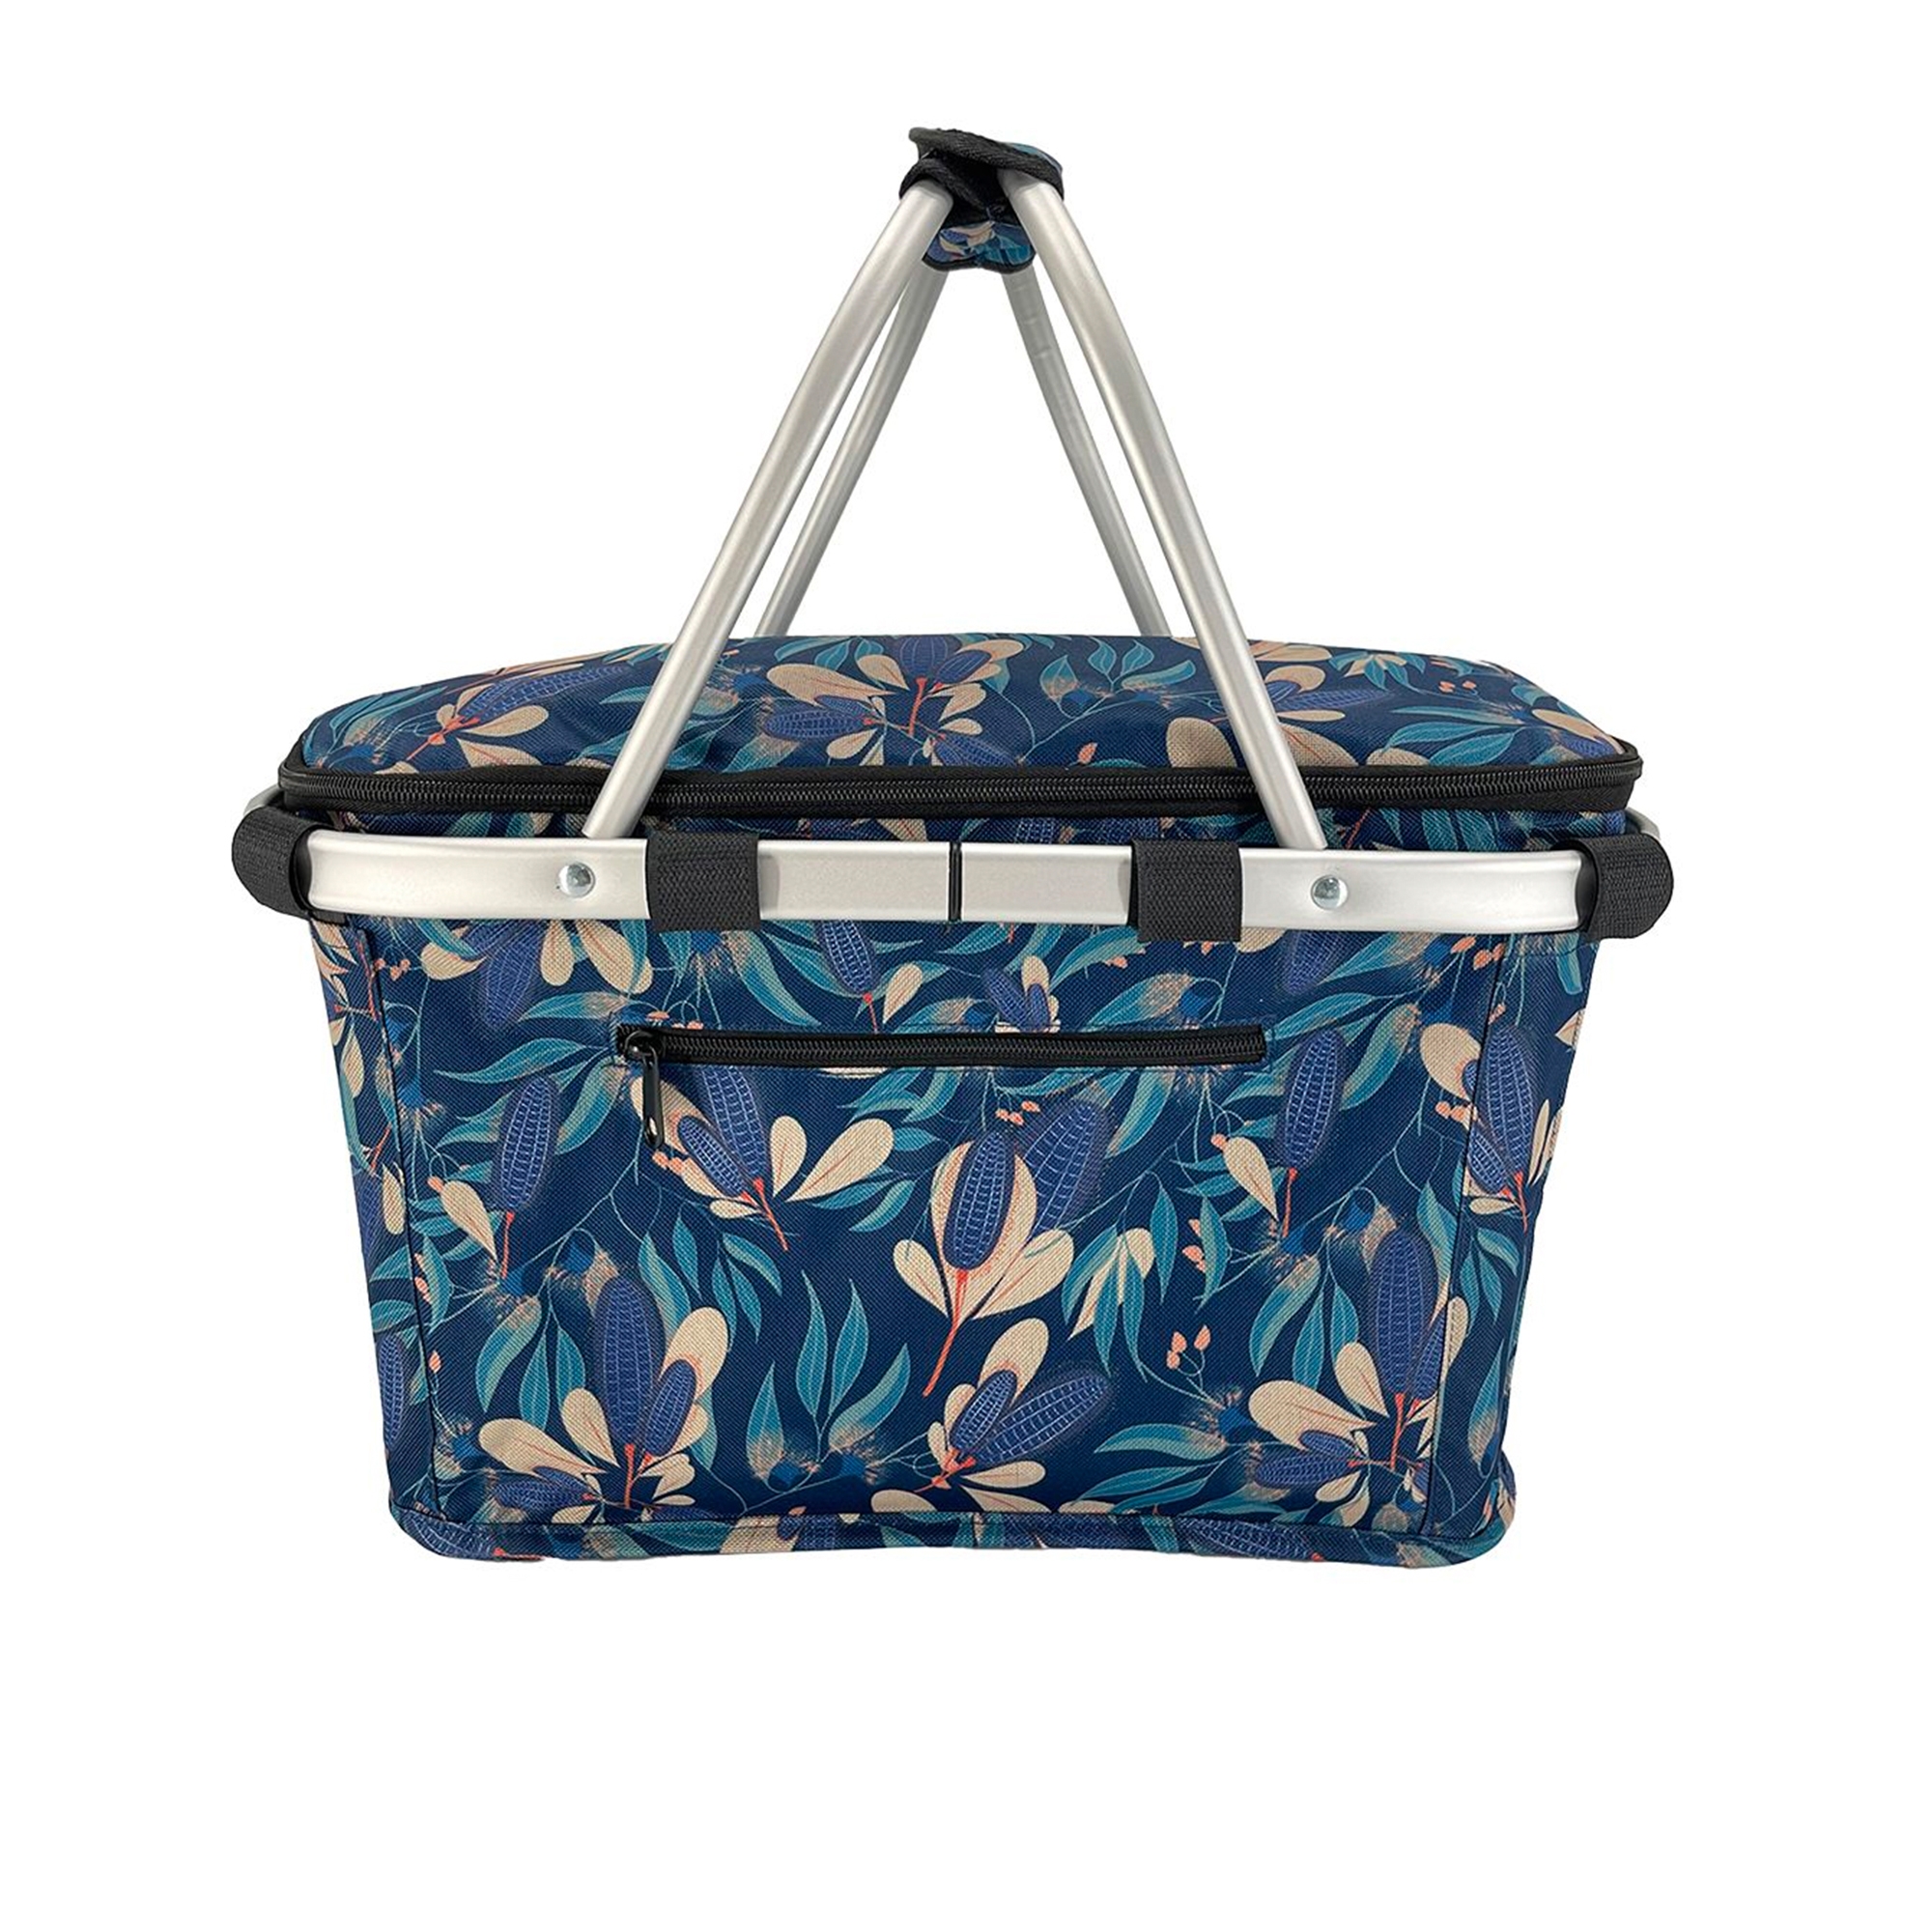 Sachi Insulated Carry Basket with Lid Native Bushland Image 2